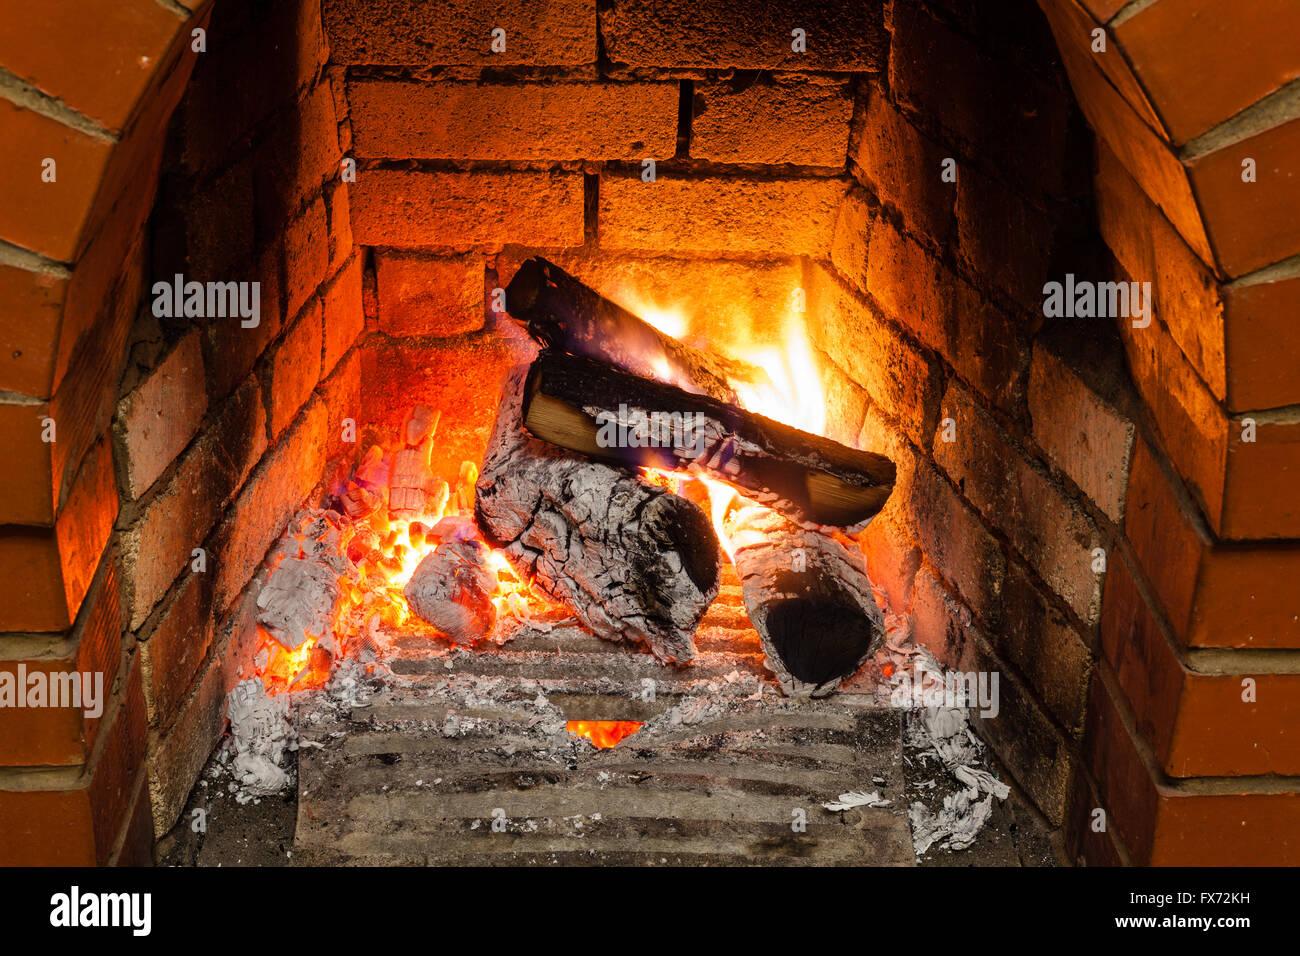 ash, coal and burning wood in fireplace in country cottage Stock Photo